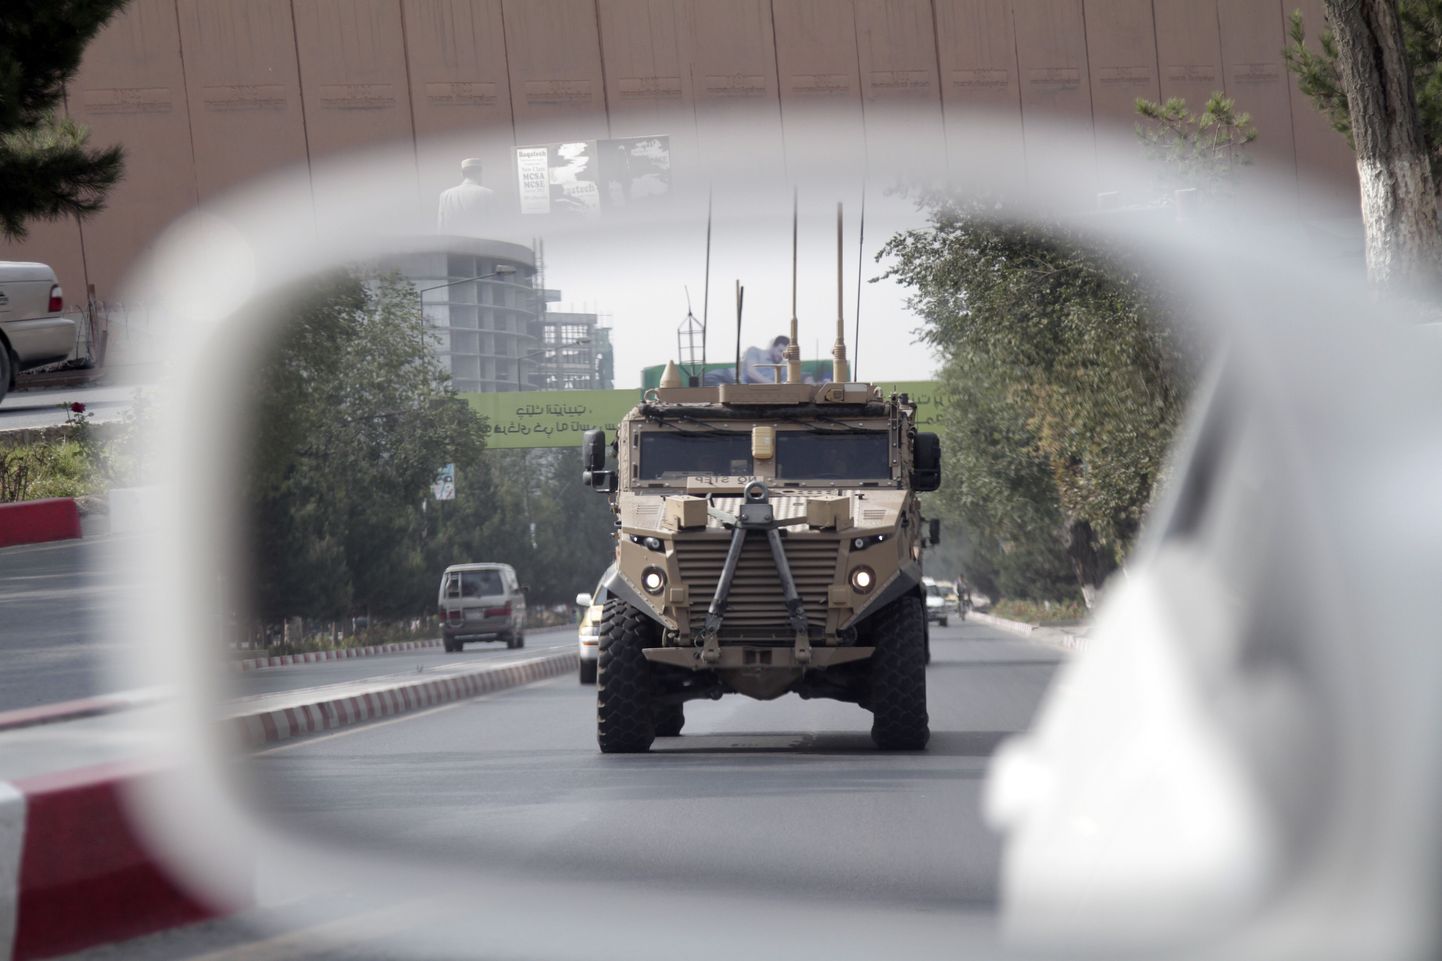 A patrolling U.S. armored vehicle is reflected in the mirror of a car in Kabul, Afghanistan, Wednesday, Aug. 23, 2017.  In a national address Monday night, U.S. President Donald Trump reversed his past calls for a speedy exit and recommitted the United States to the 16-year-old conflict, saying U.S. troops must "fight to win." (AP Photo/Rahmat Gul)